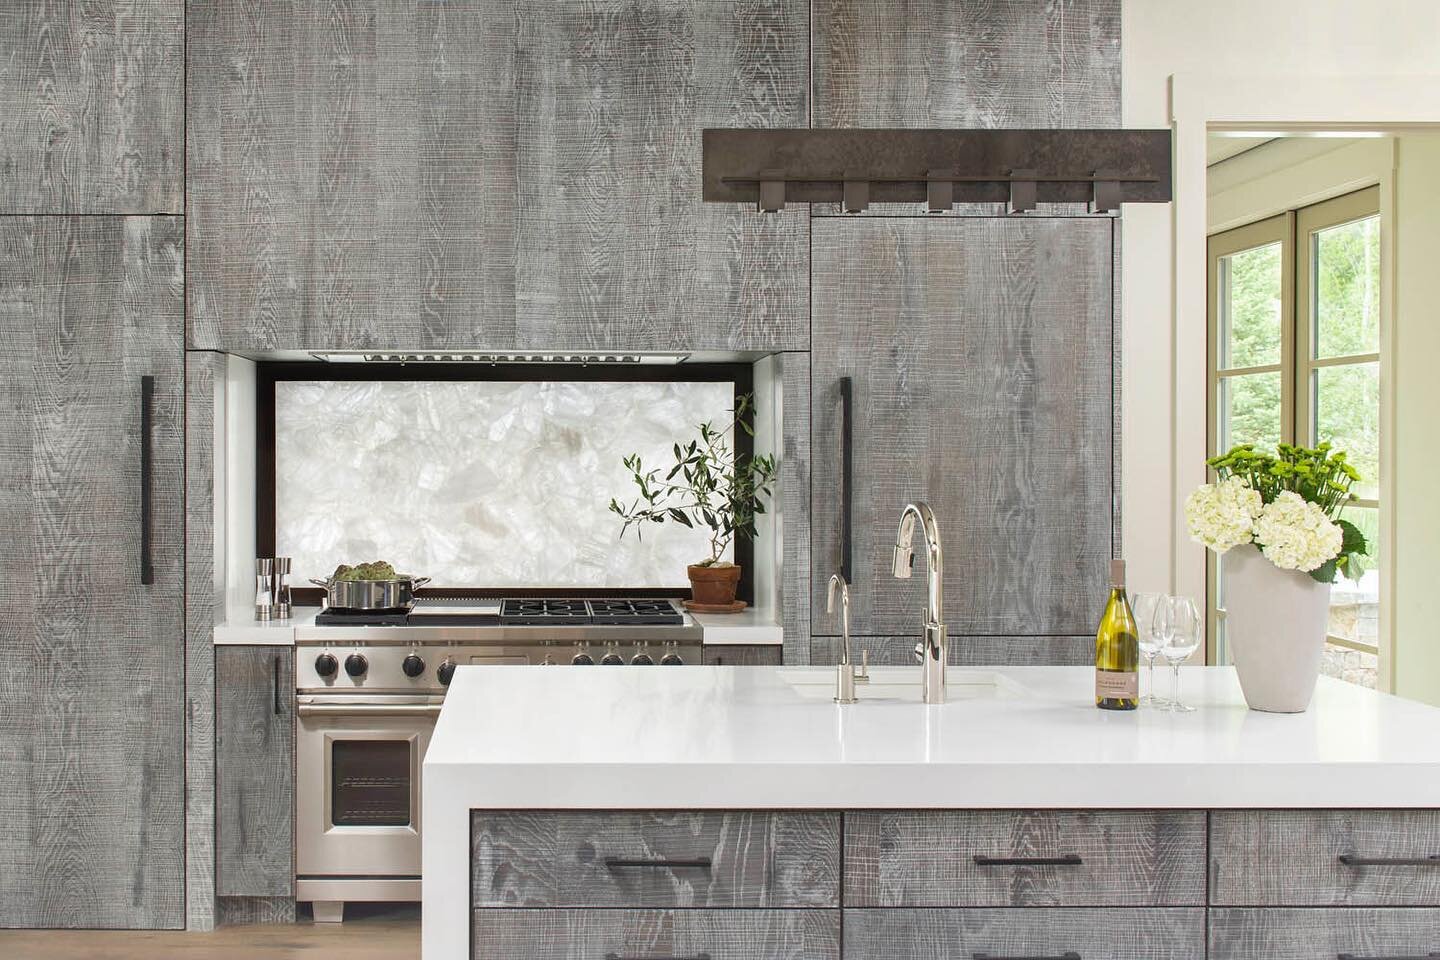 This modern kitchen showcases rustic, gray wood cabinets that frame a stunning crystal backsplash. Clean, yet warm: perfect for entertaining. 
Cabinetry: @sanctuarykitchenandbath 
Photography: @berlygavin 

#timelessdesign 
#kitchensofinstagram 
#mod